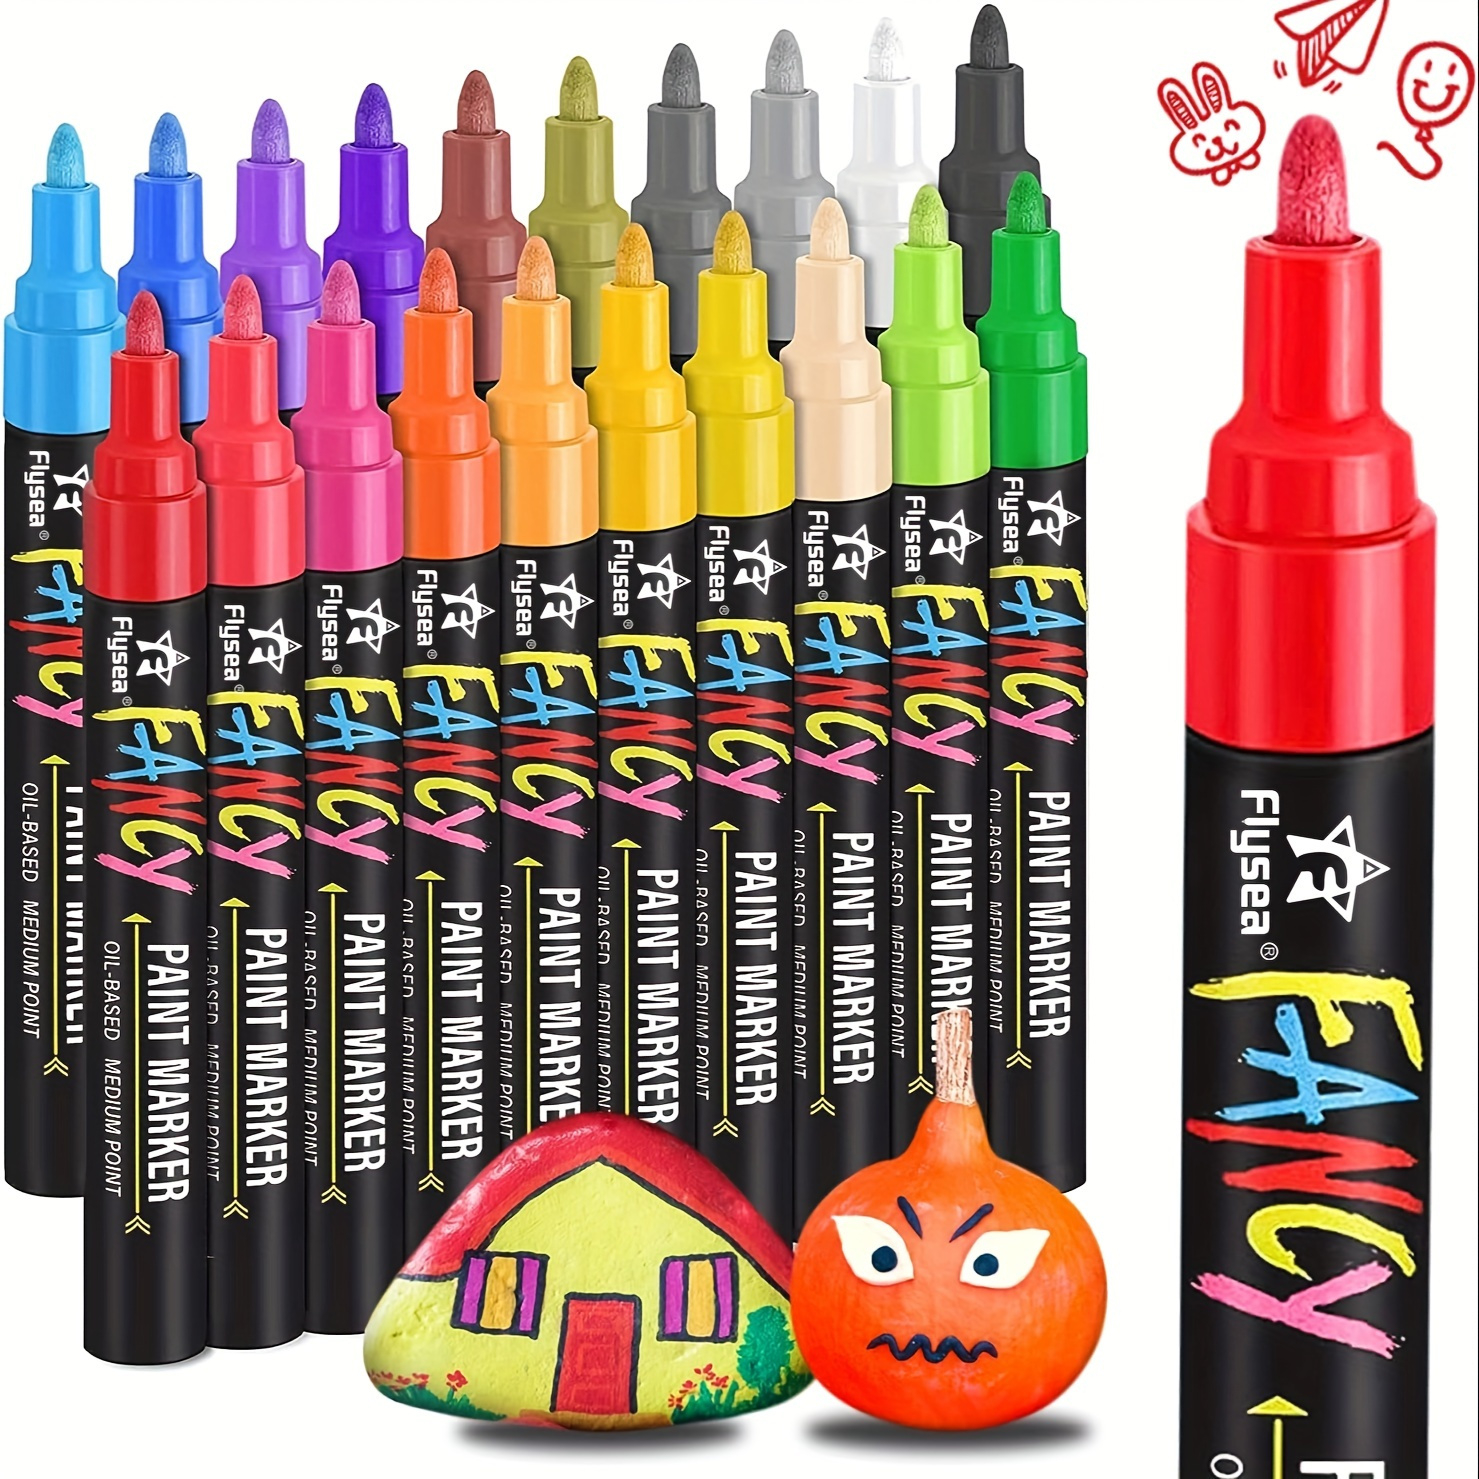 Colored Oil-Based Paint Pens: 15 Oil Based Paint Markers